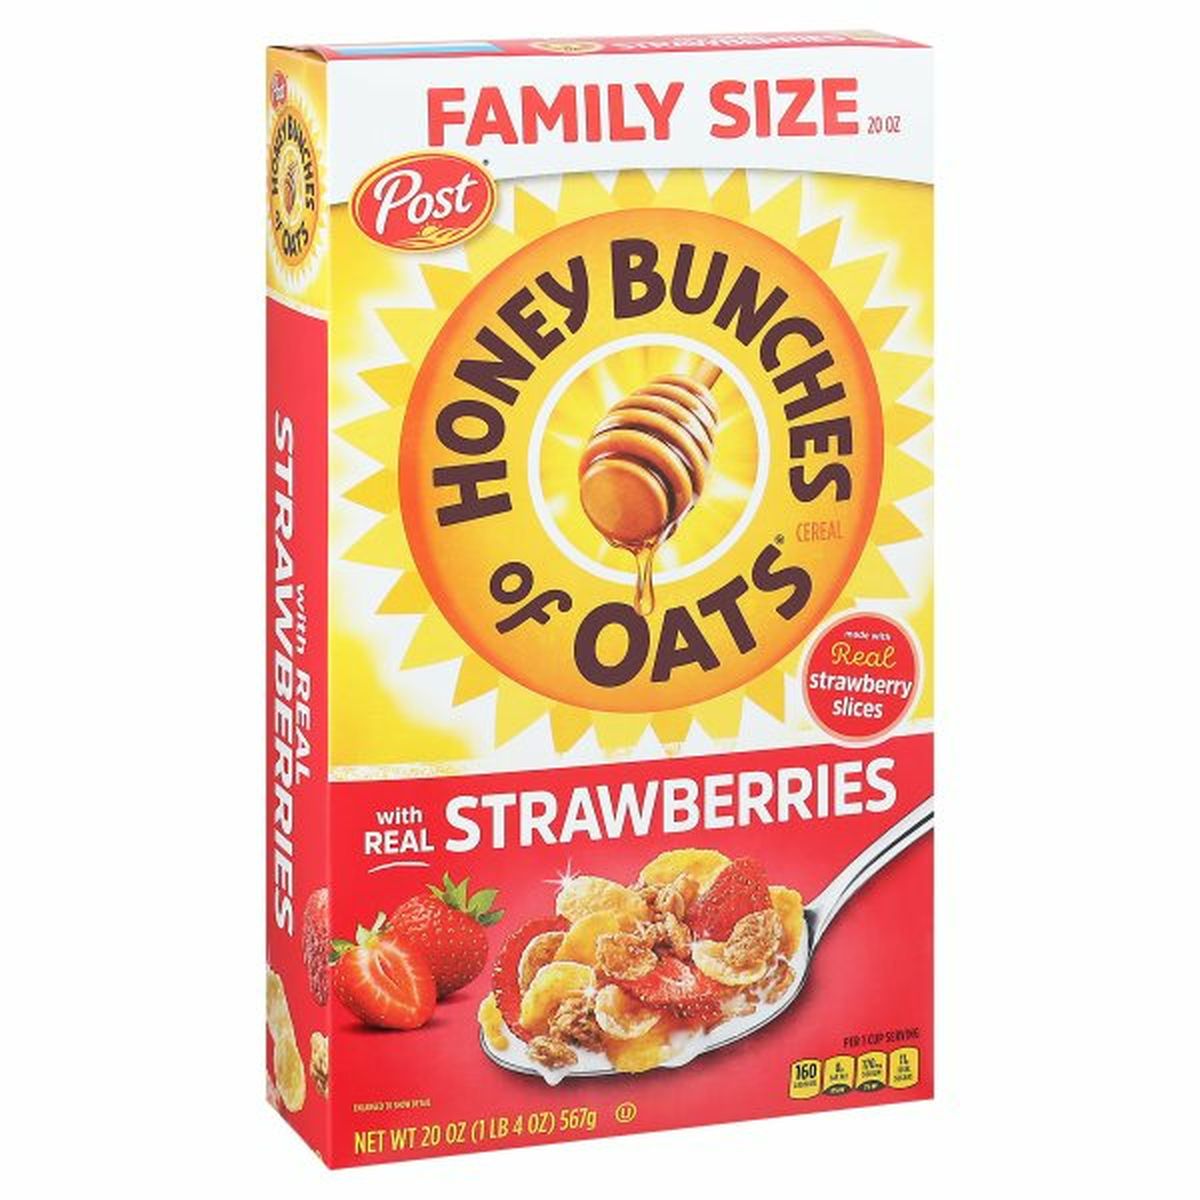 Calories in Post Cereal, Strawberries, Family Size